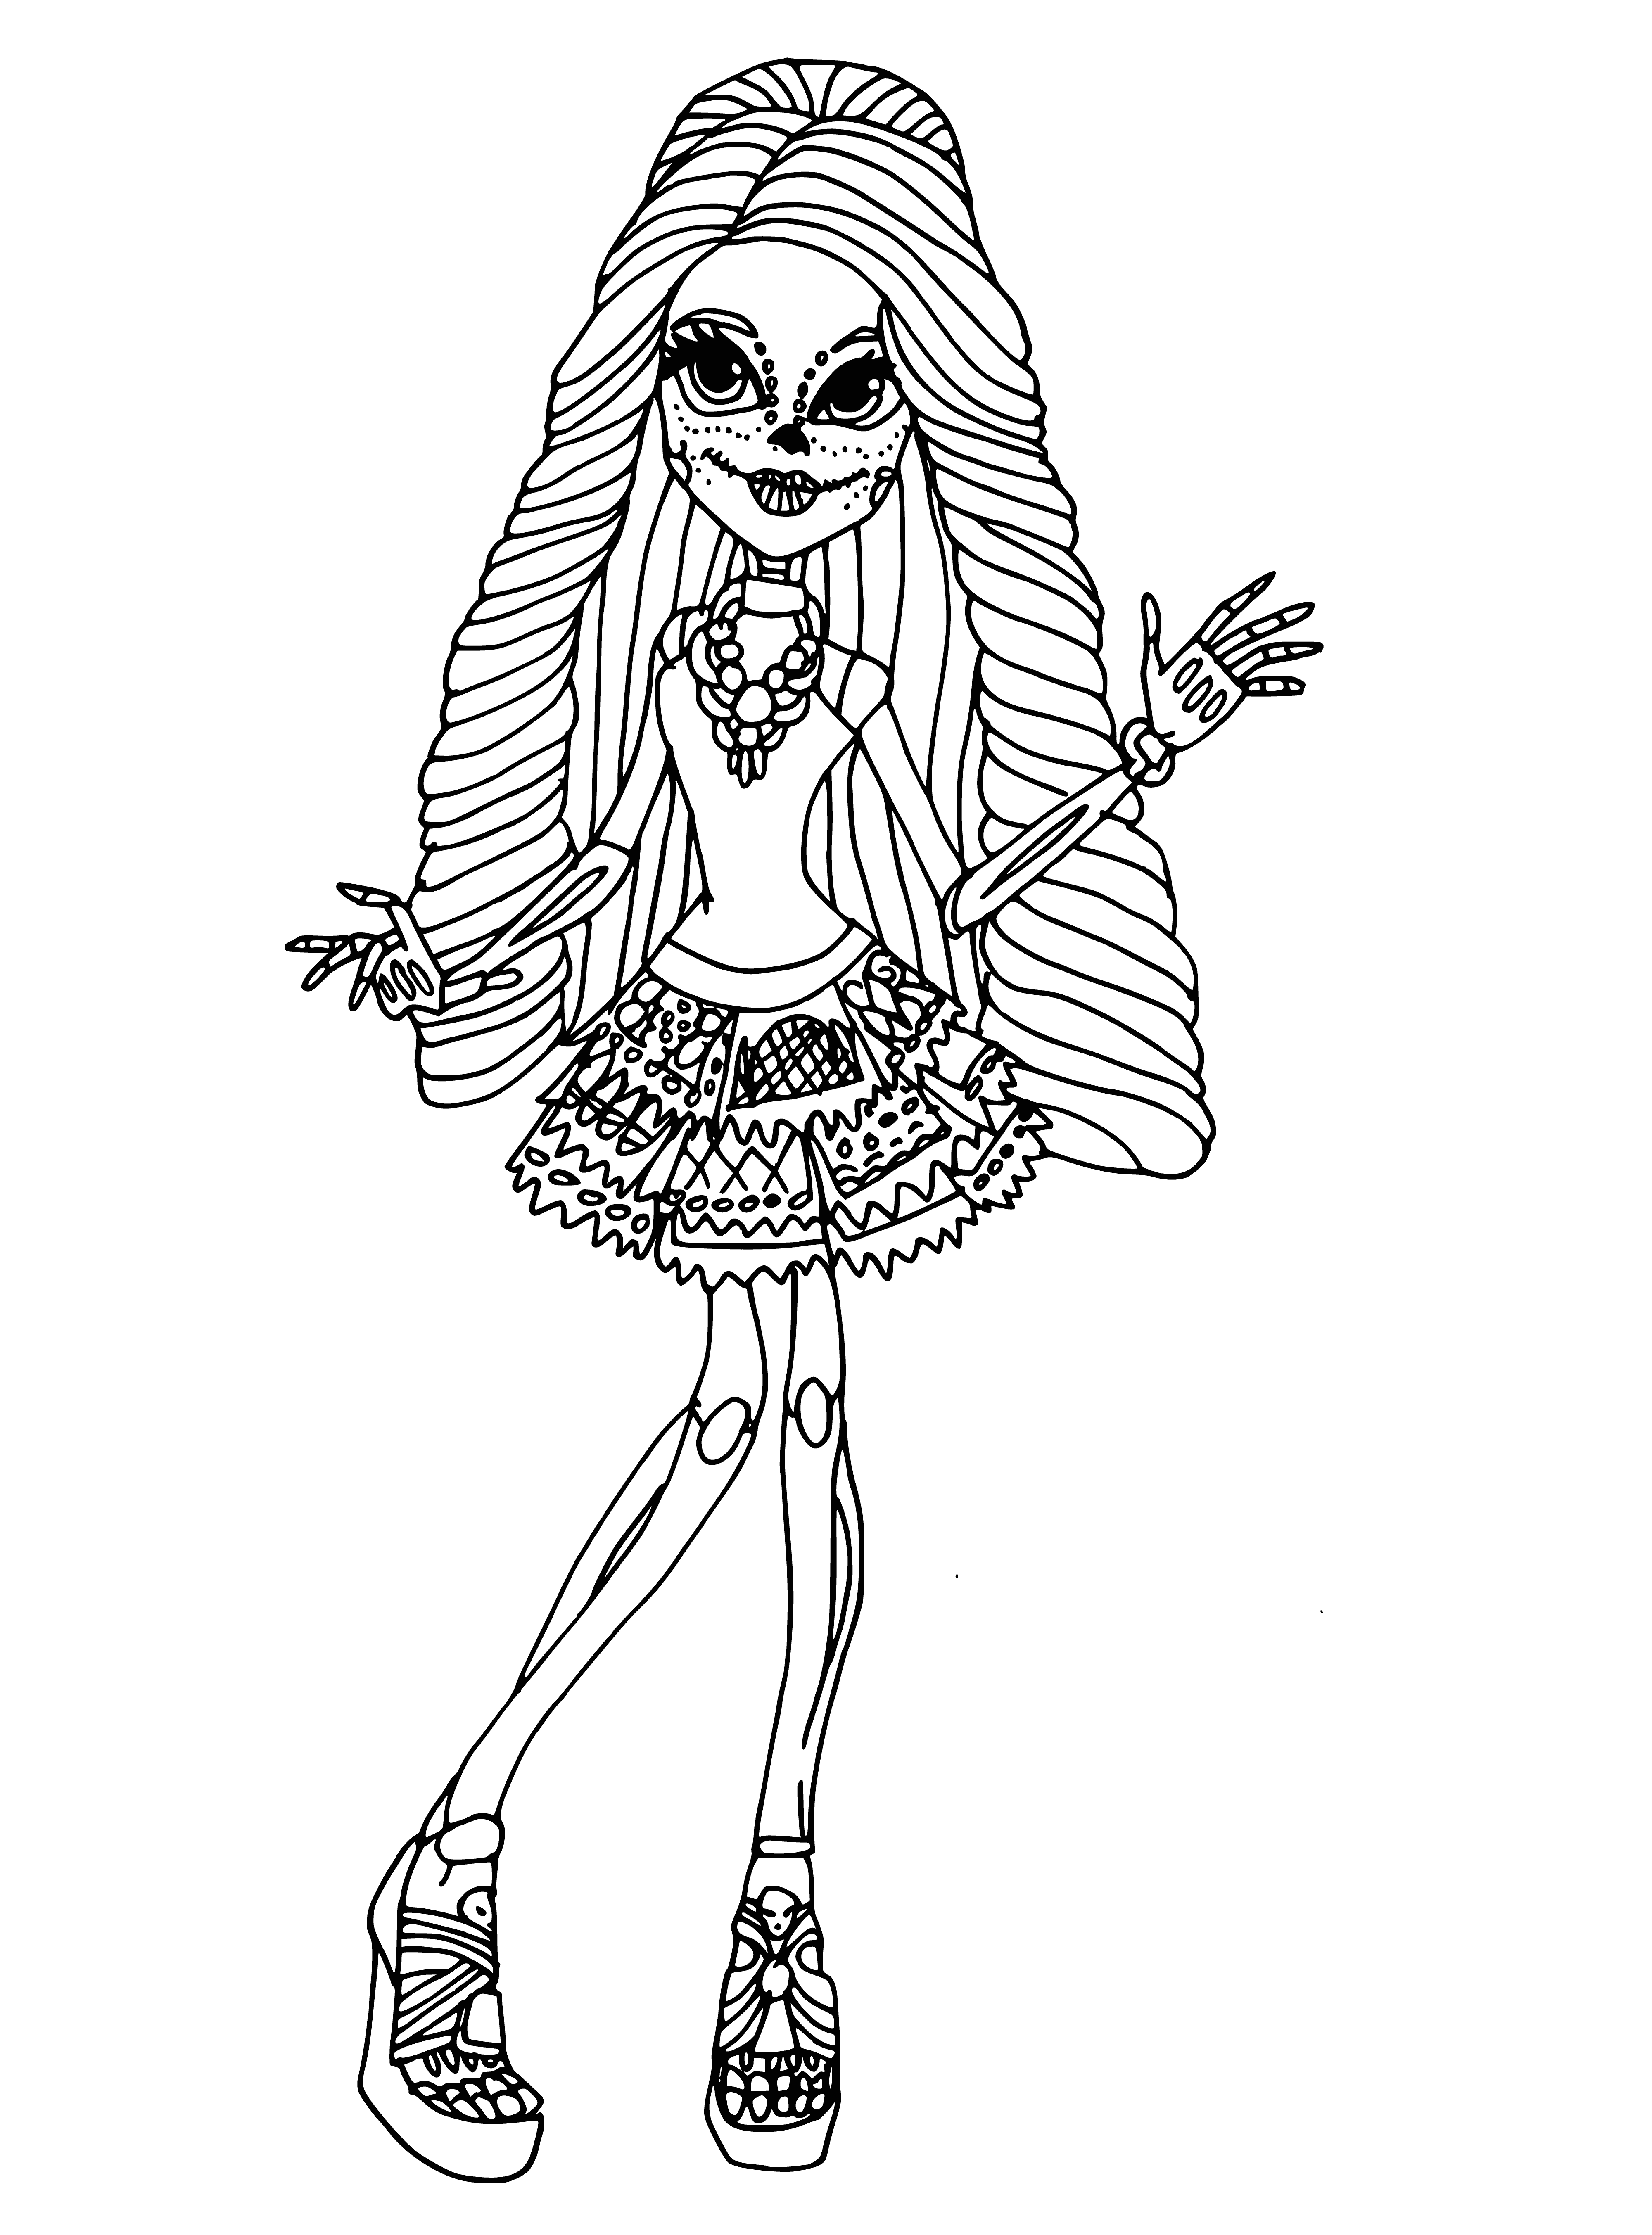 coloring page: Skelita is a skeleton with long black hair and big black eyes who wears a pink dress with a black bow.